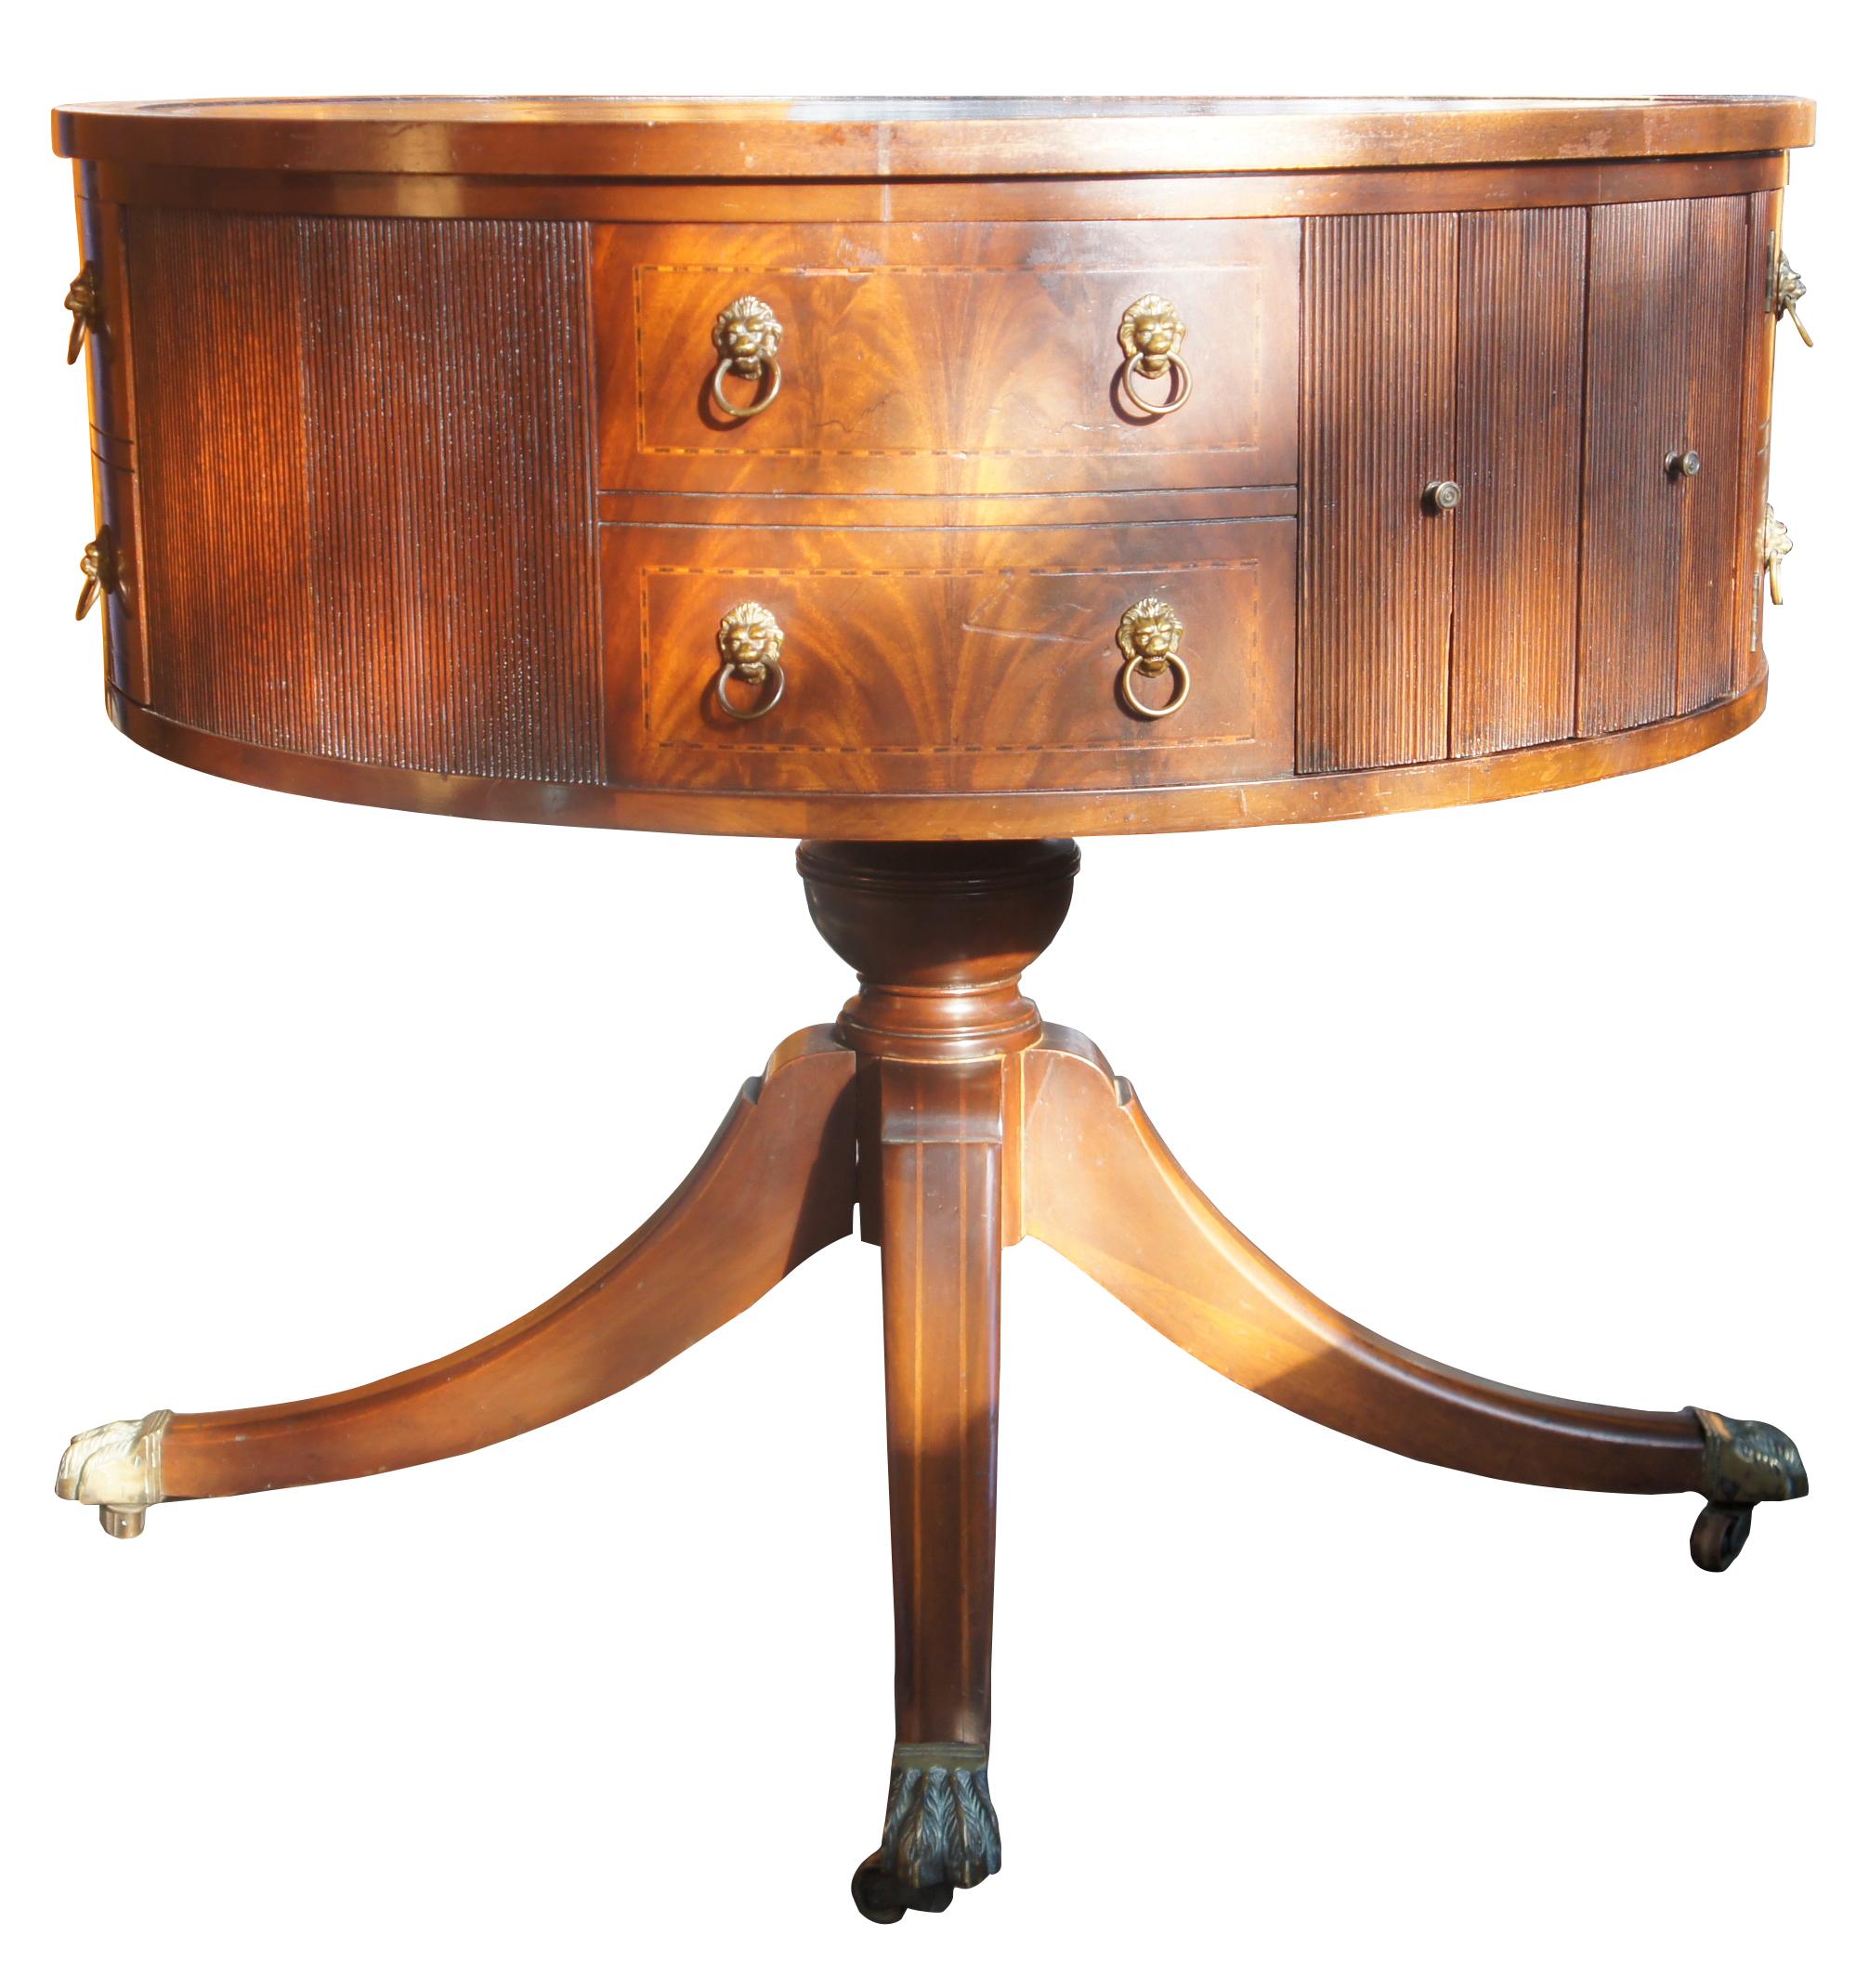 1940s Brunswick Panatrope drum table Sheraton Duncan Phyfe mahogany music radio

An extremely rare piece that both fits the aesthetic and musical value for any collector. Complete with a radio, phonograph and auxiliary capabilities. Made from